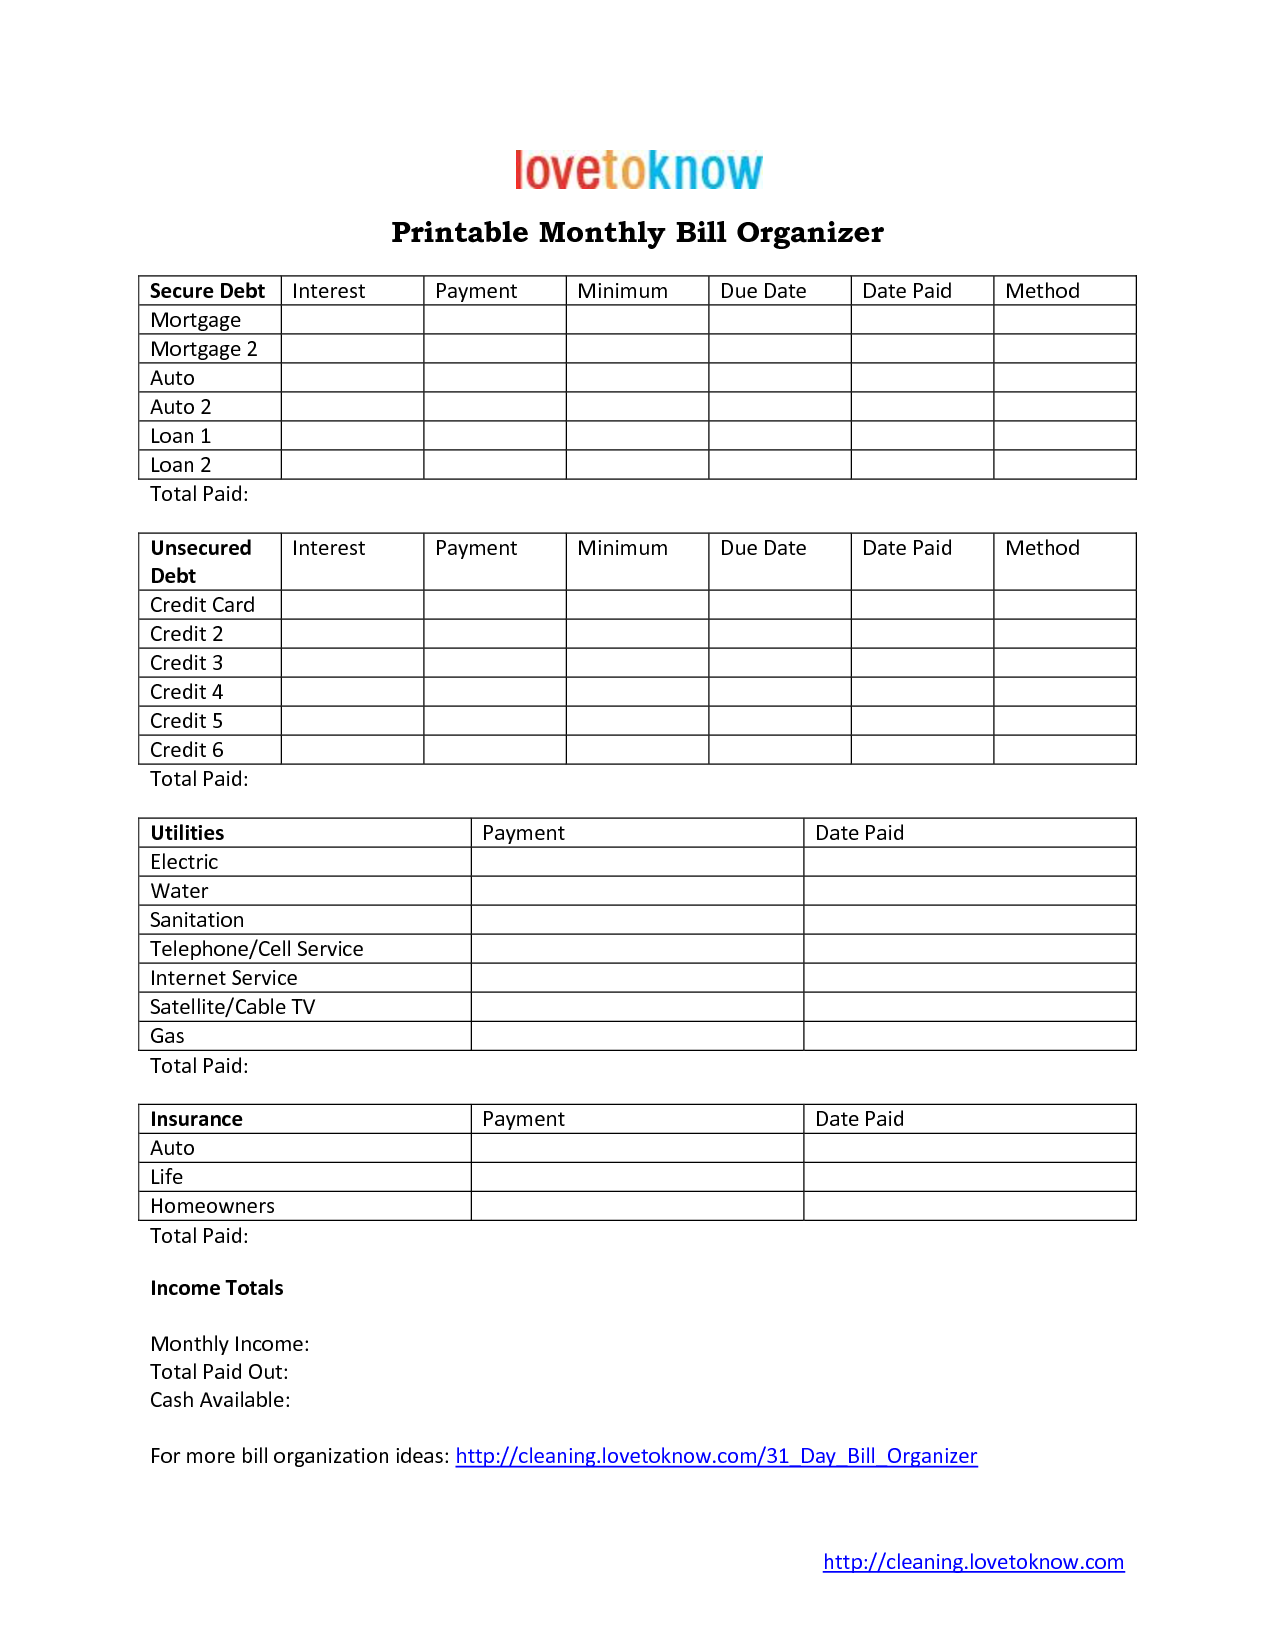 free-printable-monthly-bill-organizer-form-printable-forms-free-online